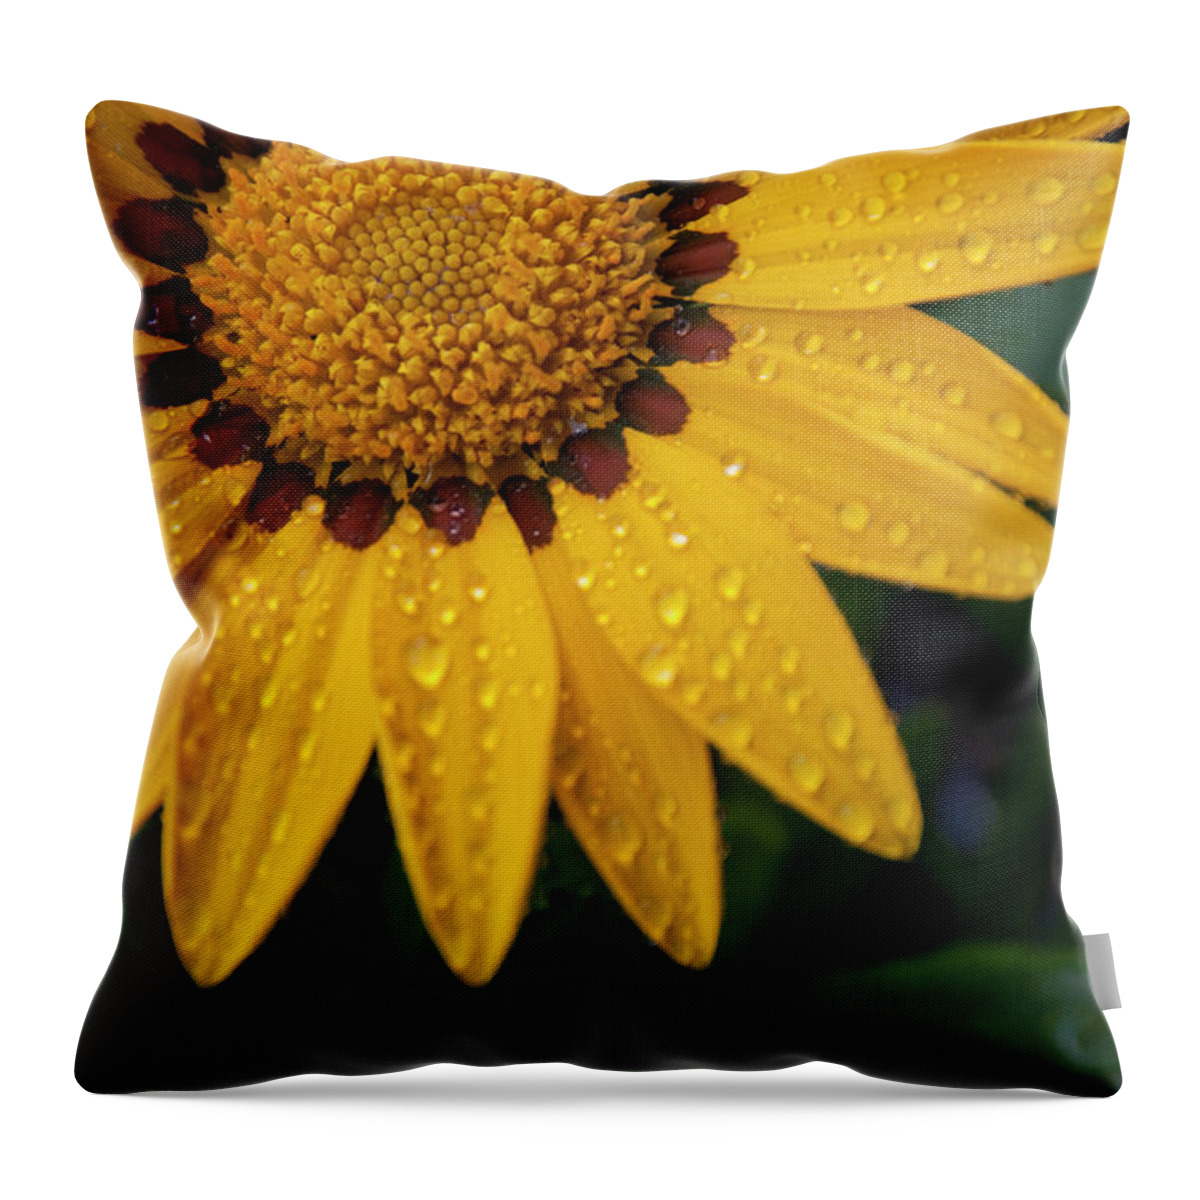 Yellow Flower Throw Pillow featuring the photograph Blossom by Ron White